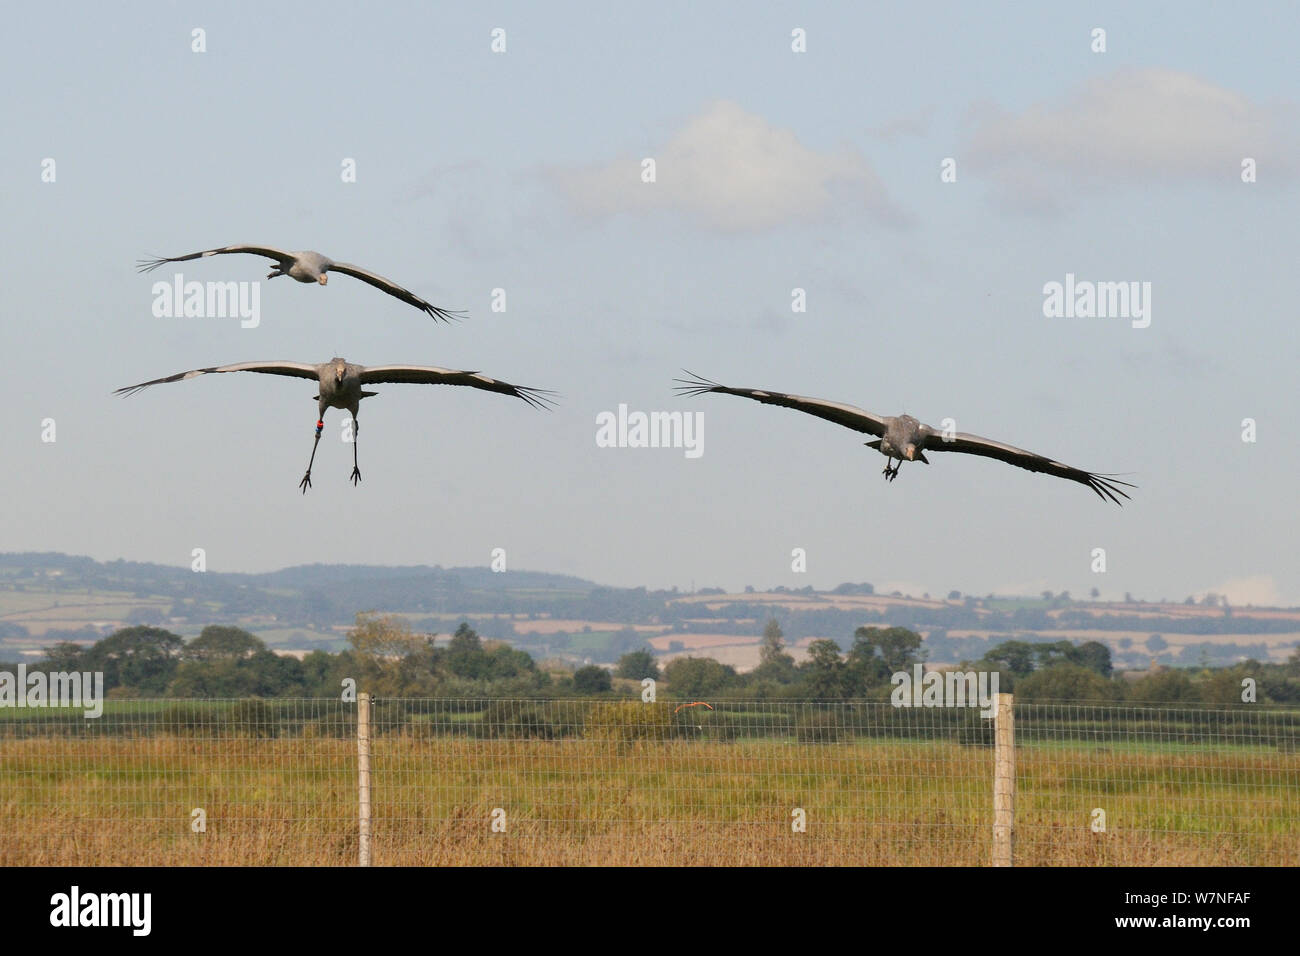 Three young Common / Eurasian cranes (Grus grus) flying back in over the fence of their fox-proof roost and initial release enclosure, Somerset Levels, England, UK, September 2012 Stock Photo